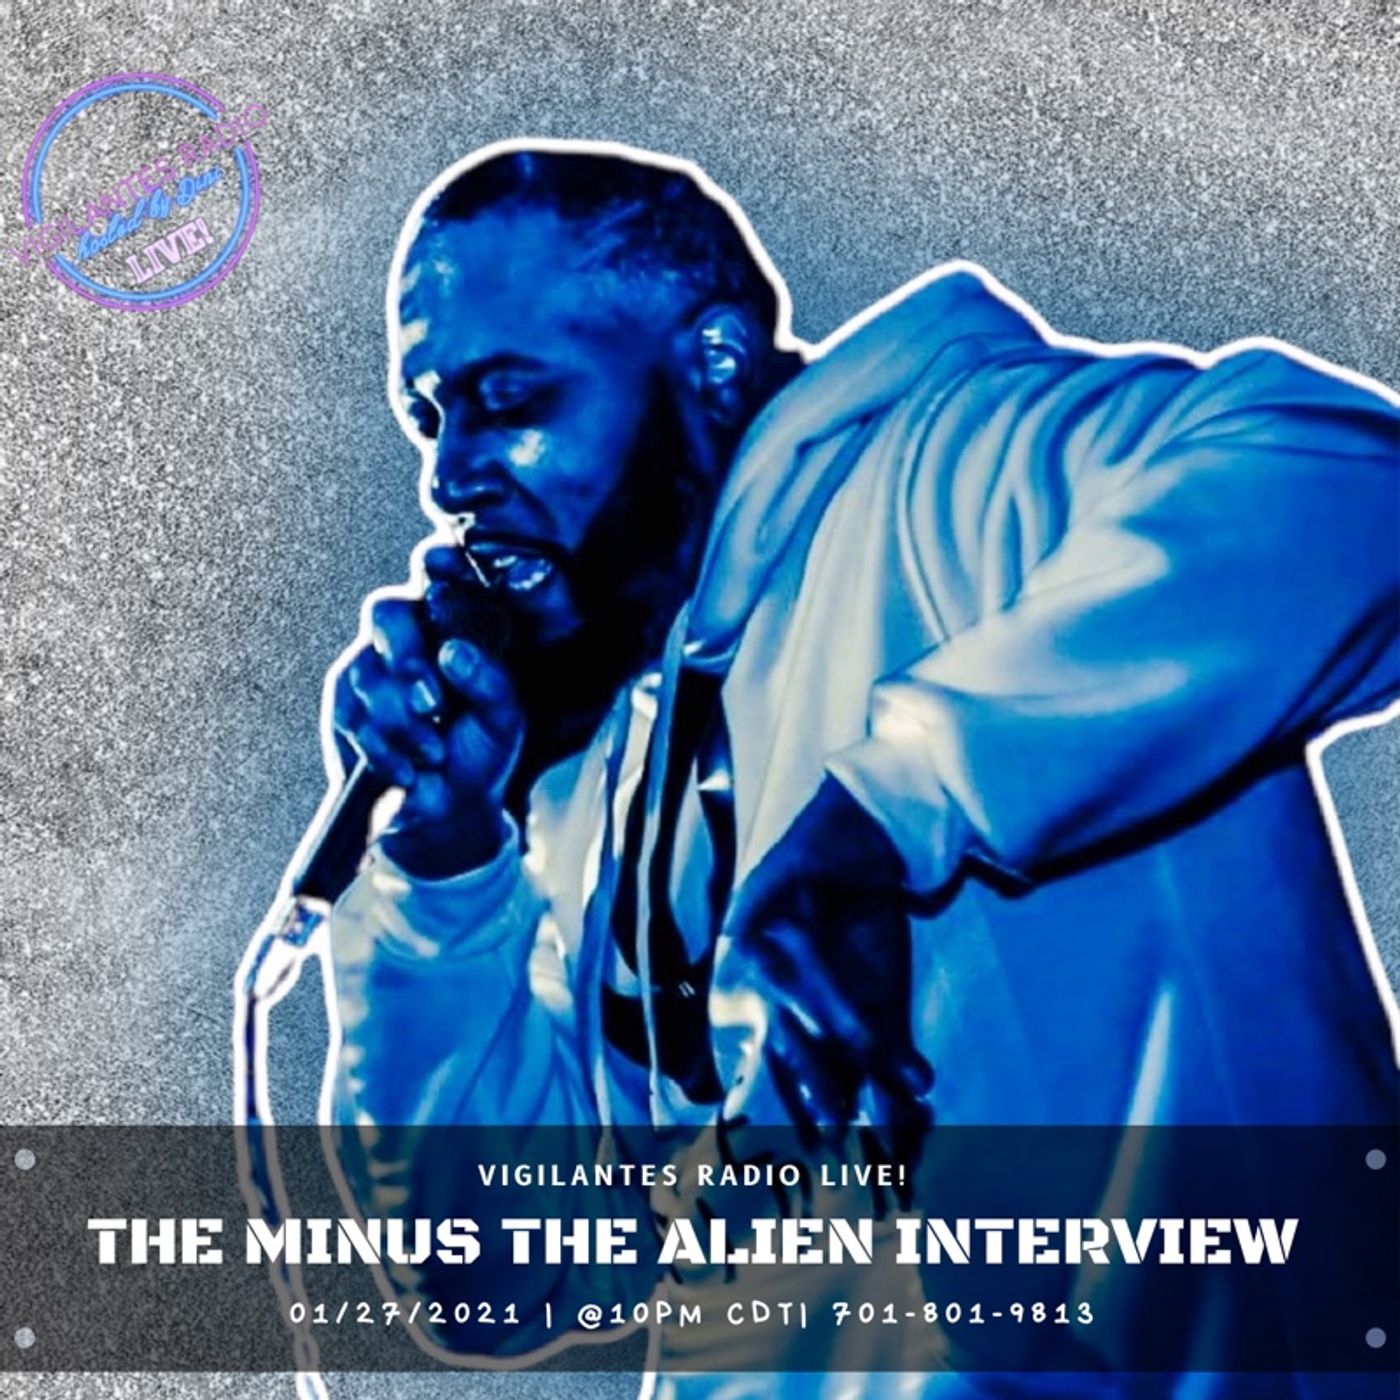 The Minus the Alien Interview. Image